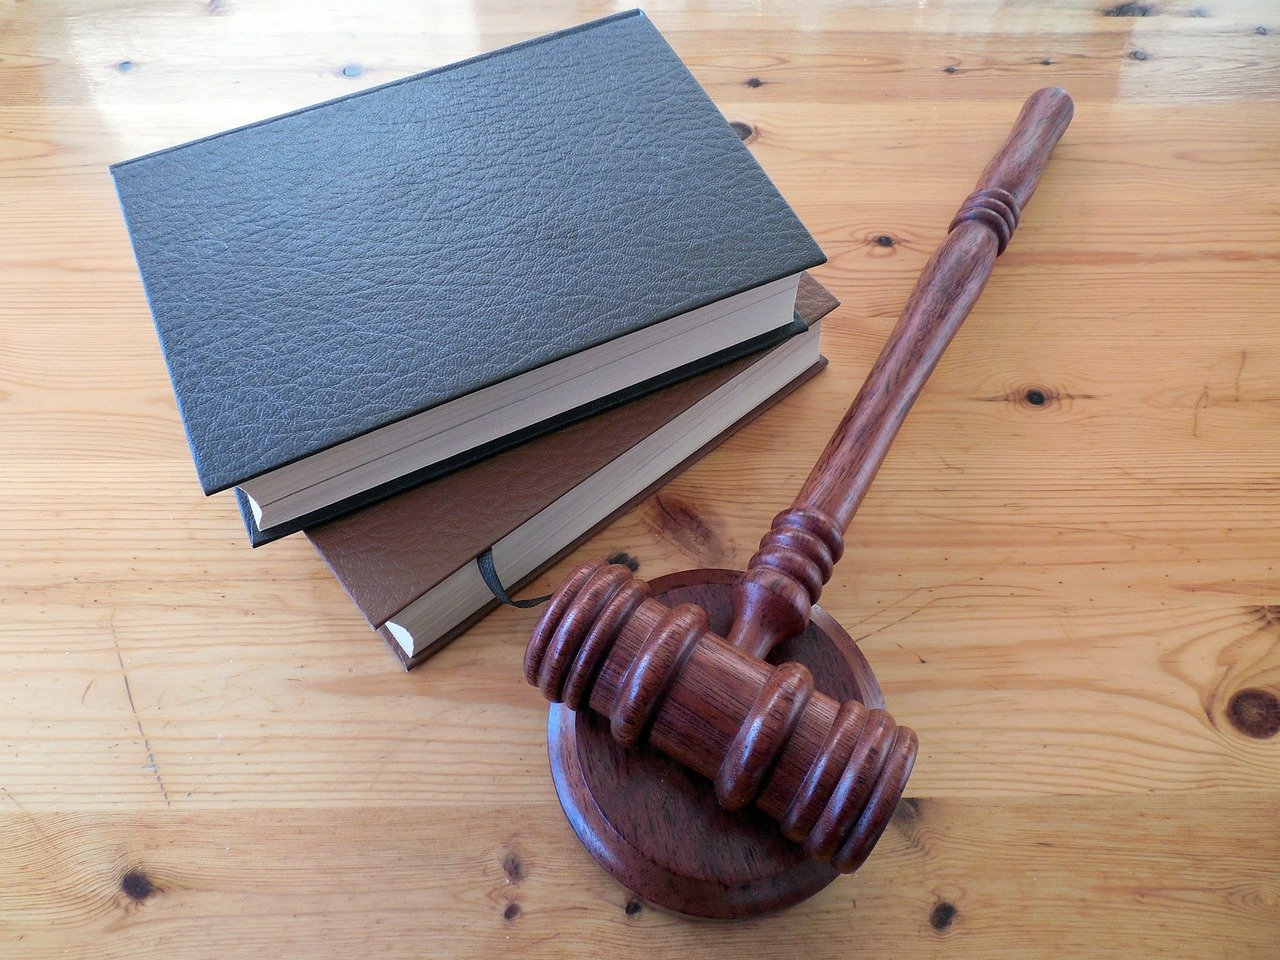 Gavel and legal books resting on table